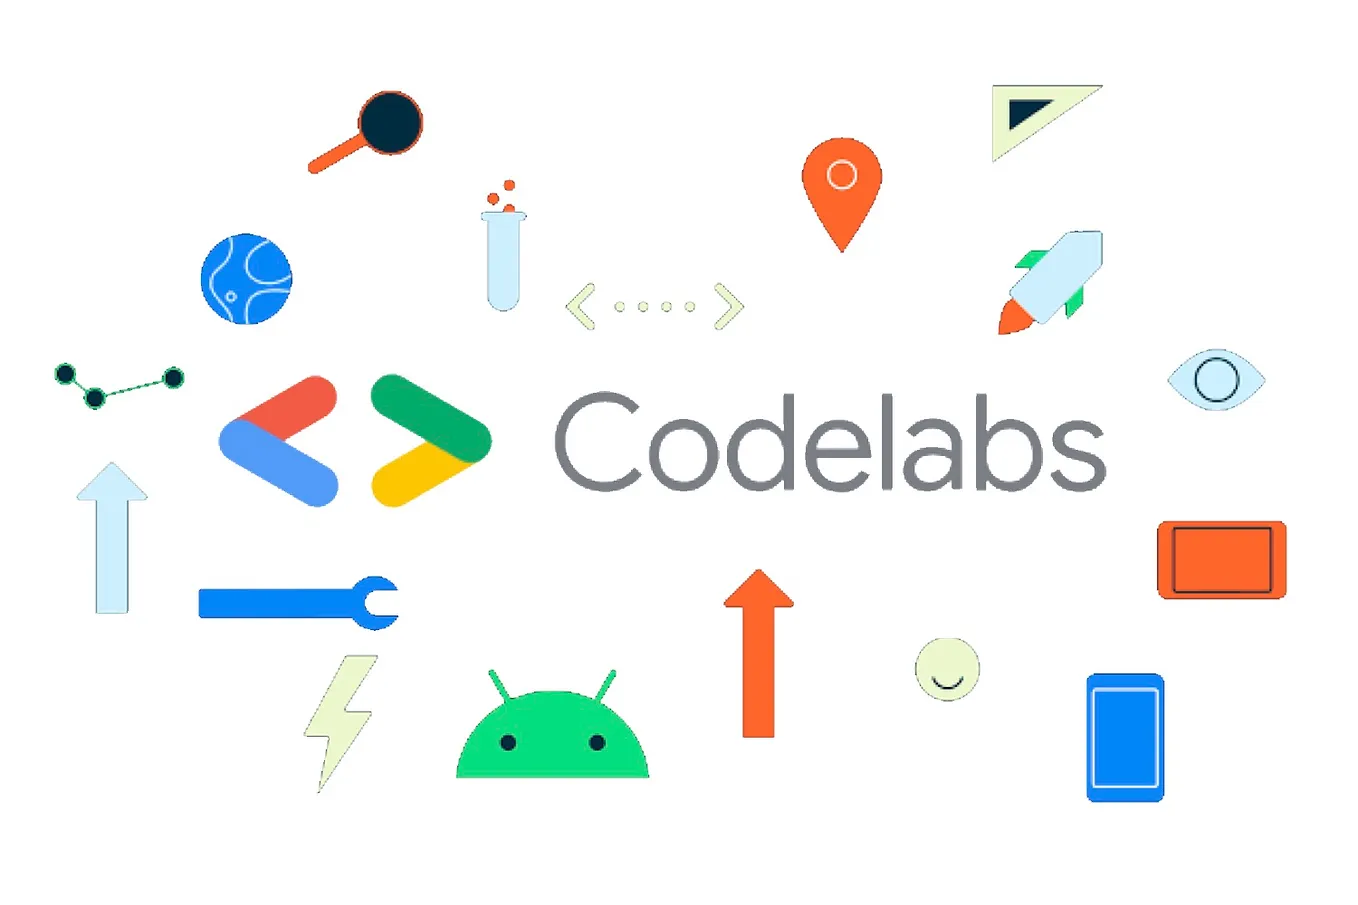 Build Interactive and Engaging Technical Tutorials with Google Codelabs 🏷